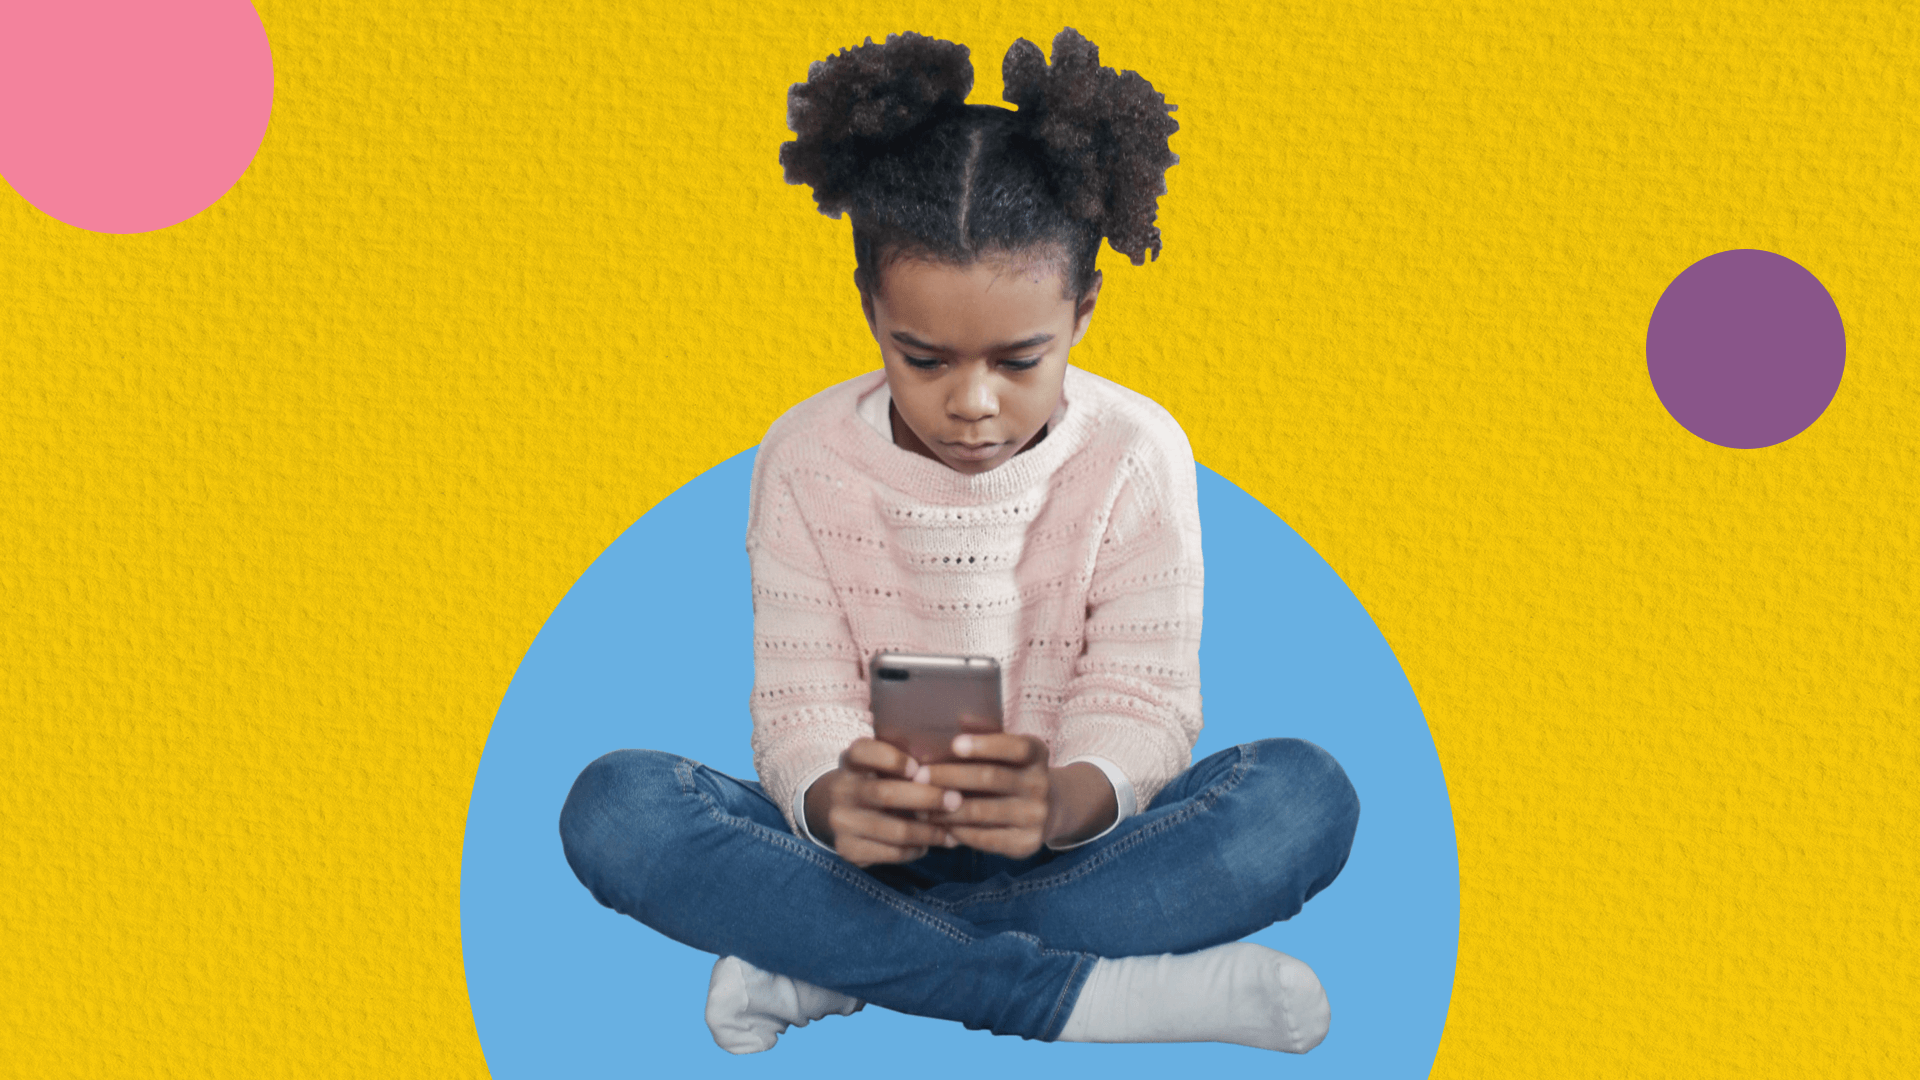 Allow or Disable In-App Purchases? Find the Parental Controls That Fit Your Family!